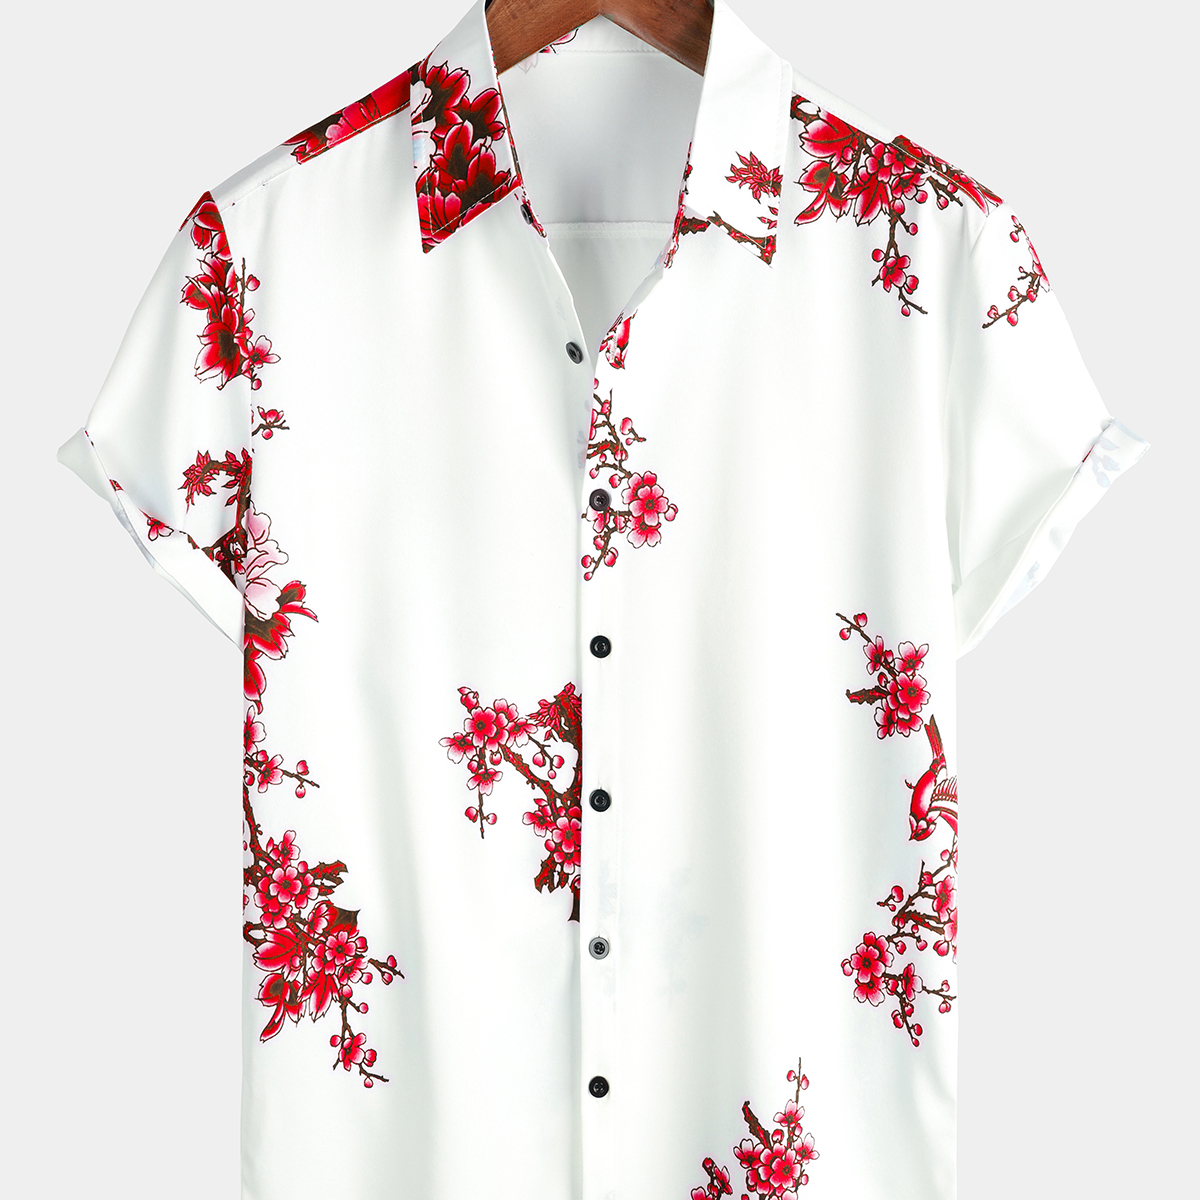 Men's Floral Printed Button Up Short Sleeve Casual Shirt